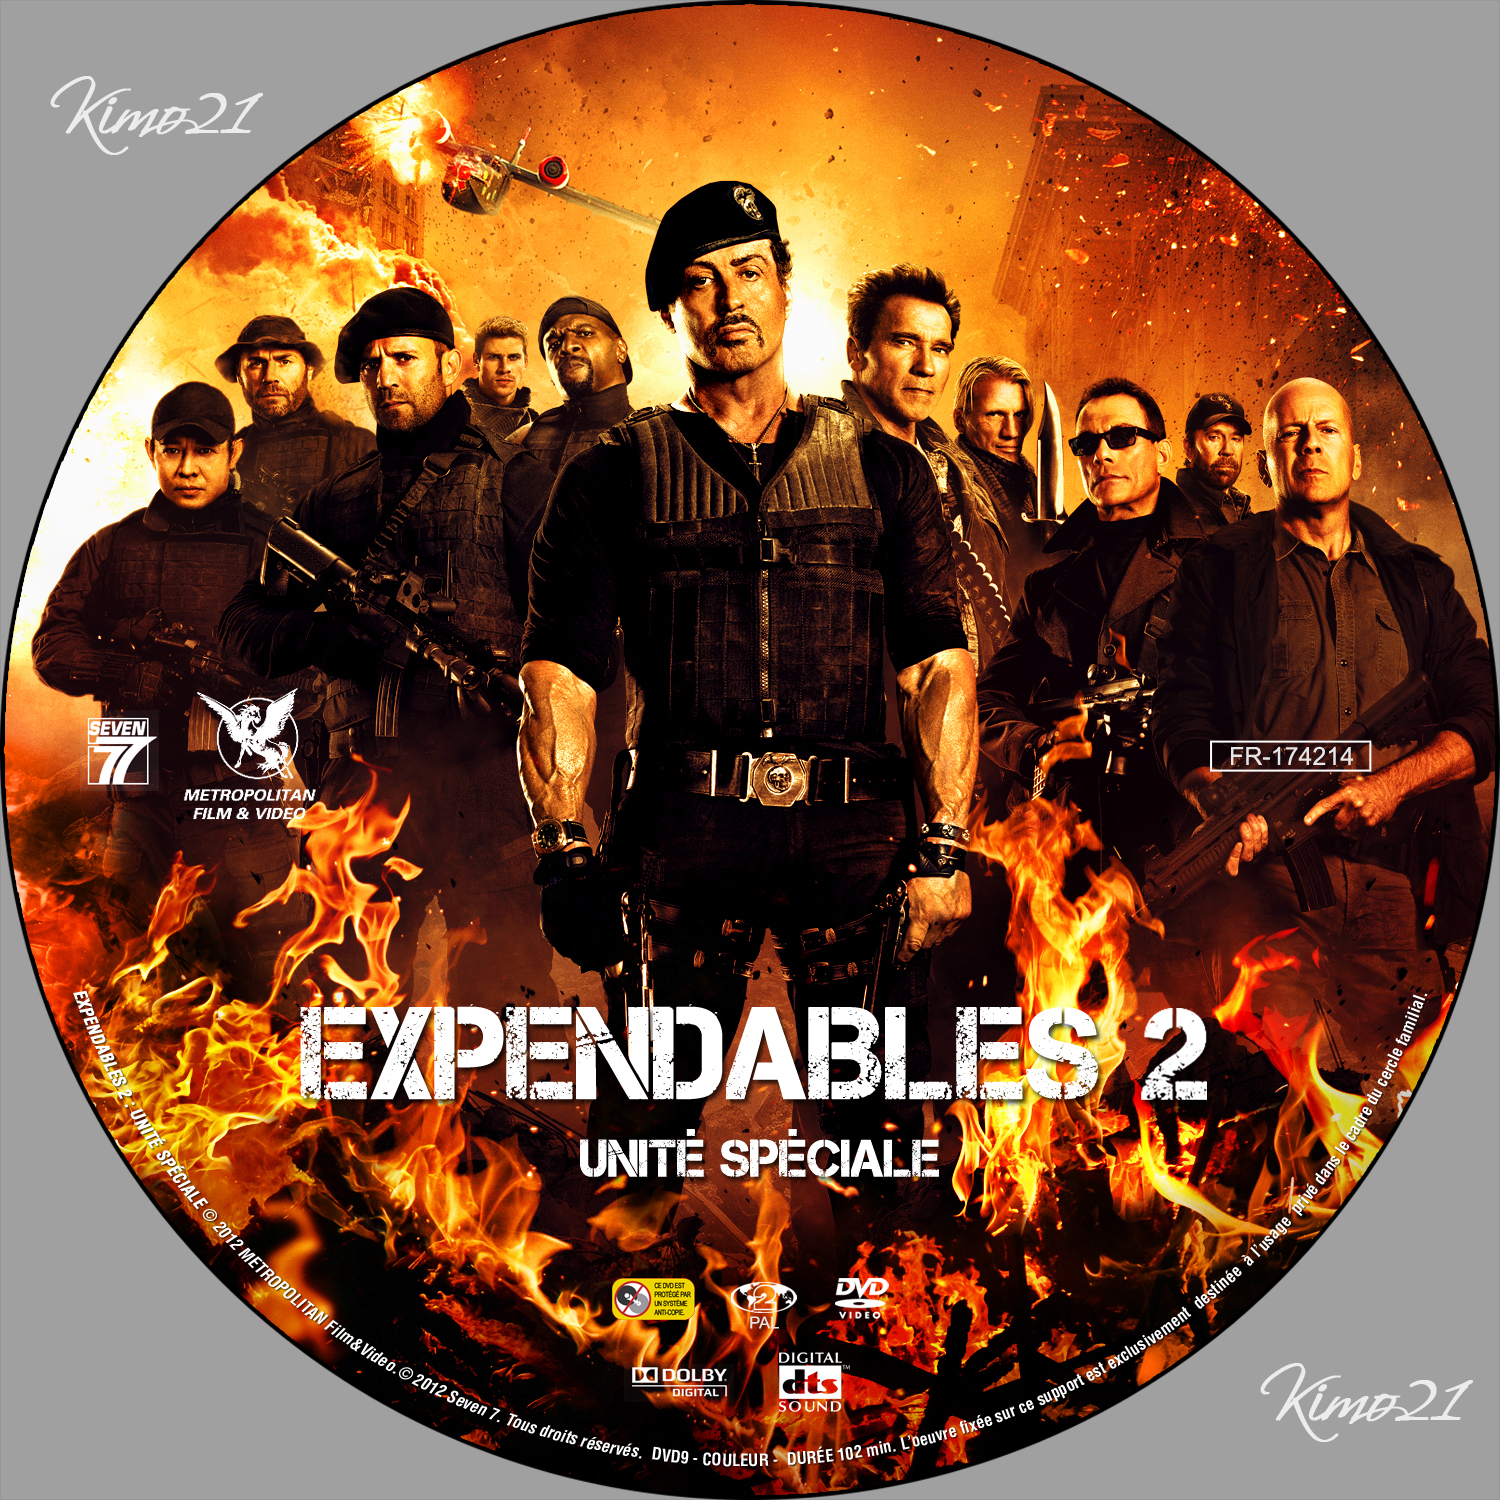 The Expendables 2 custom